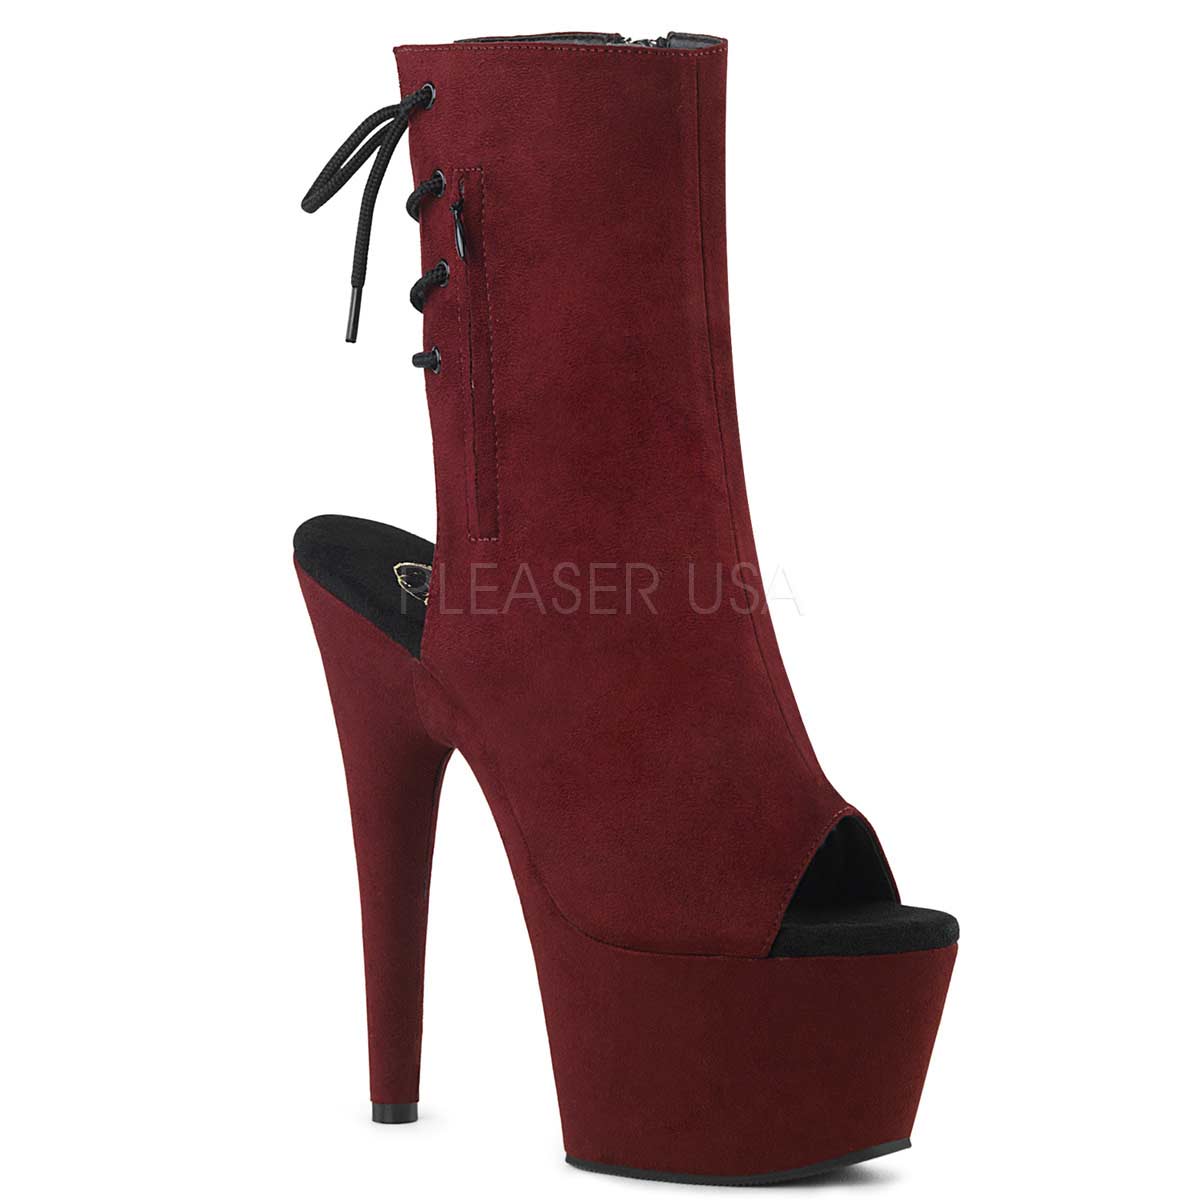 Pleaser Adore-1018FS - Burgundy Faux Suede in Sexy Boots - $55.79